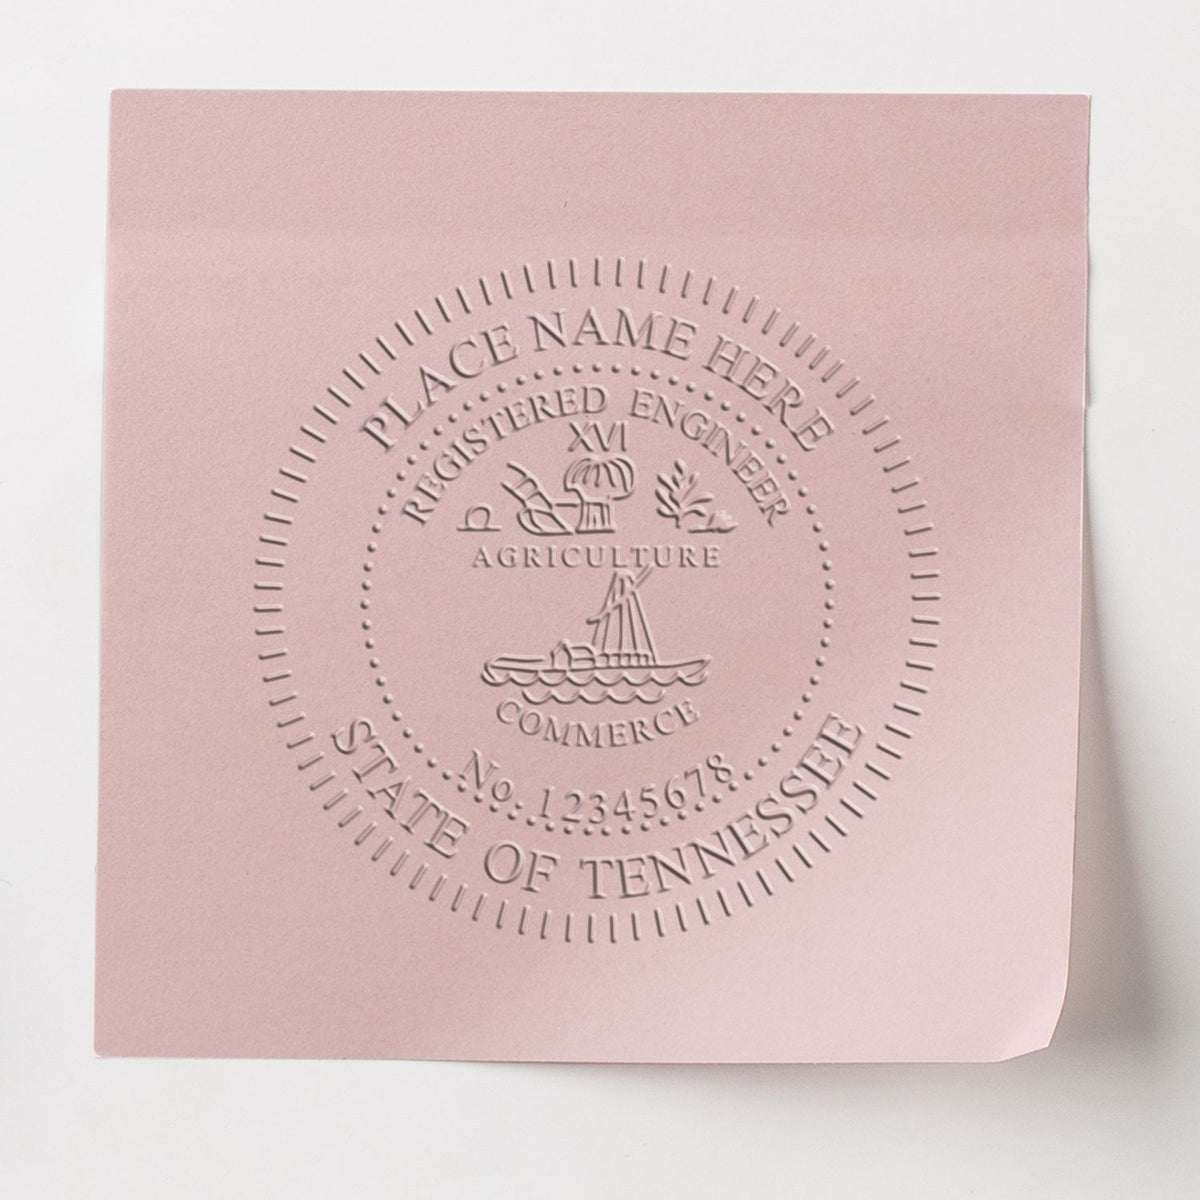 This paper is stamped with a sample imprint of the Tennessee Engineer Desk Seal, signifying its quality and reliability.